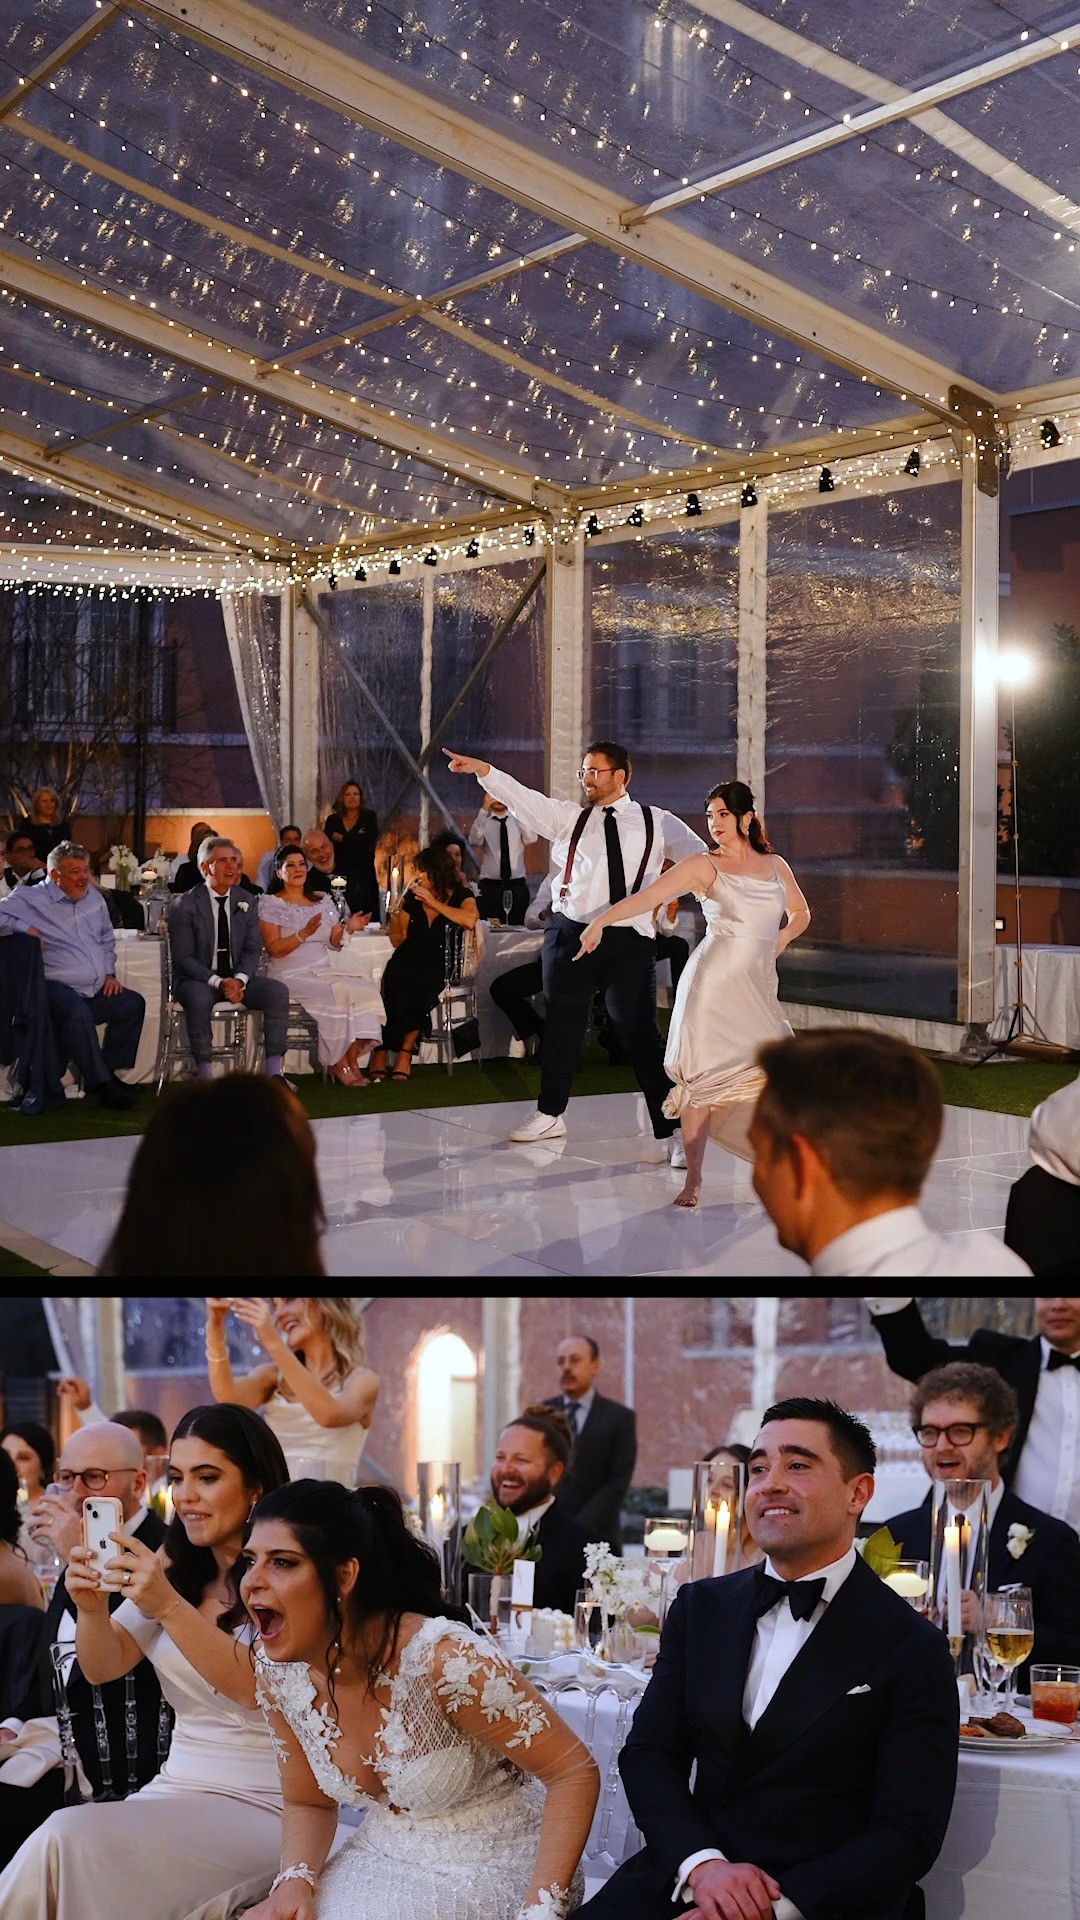 Bride is totally SURPRISED when the best man and his sister perform an unforgettable choreographed dance. #weddingdance